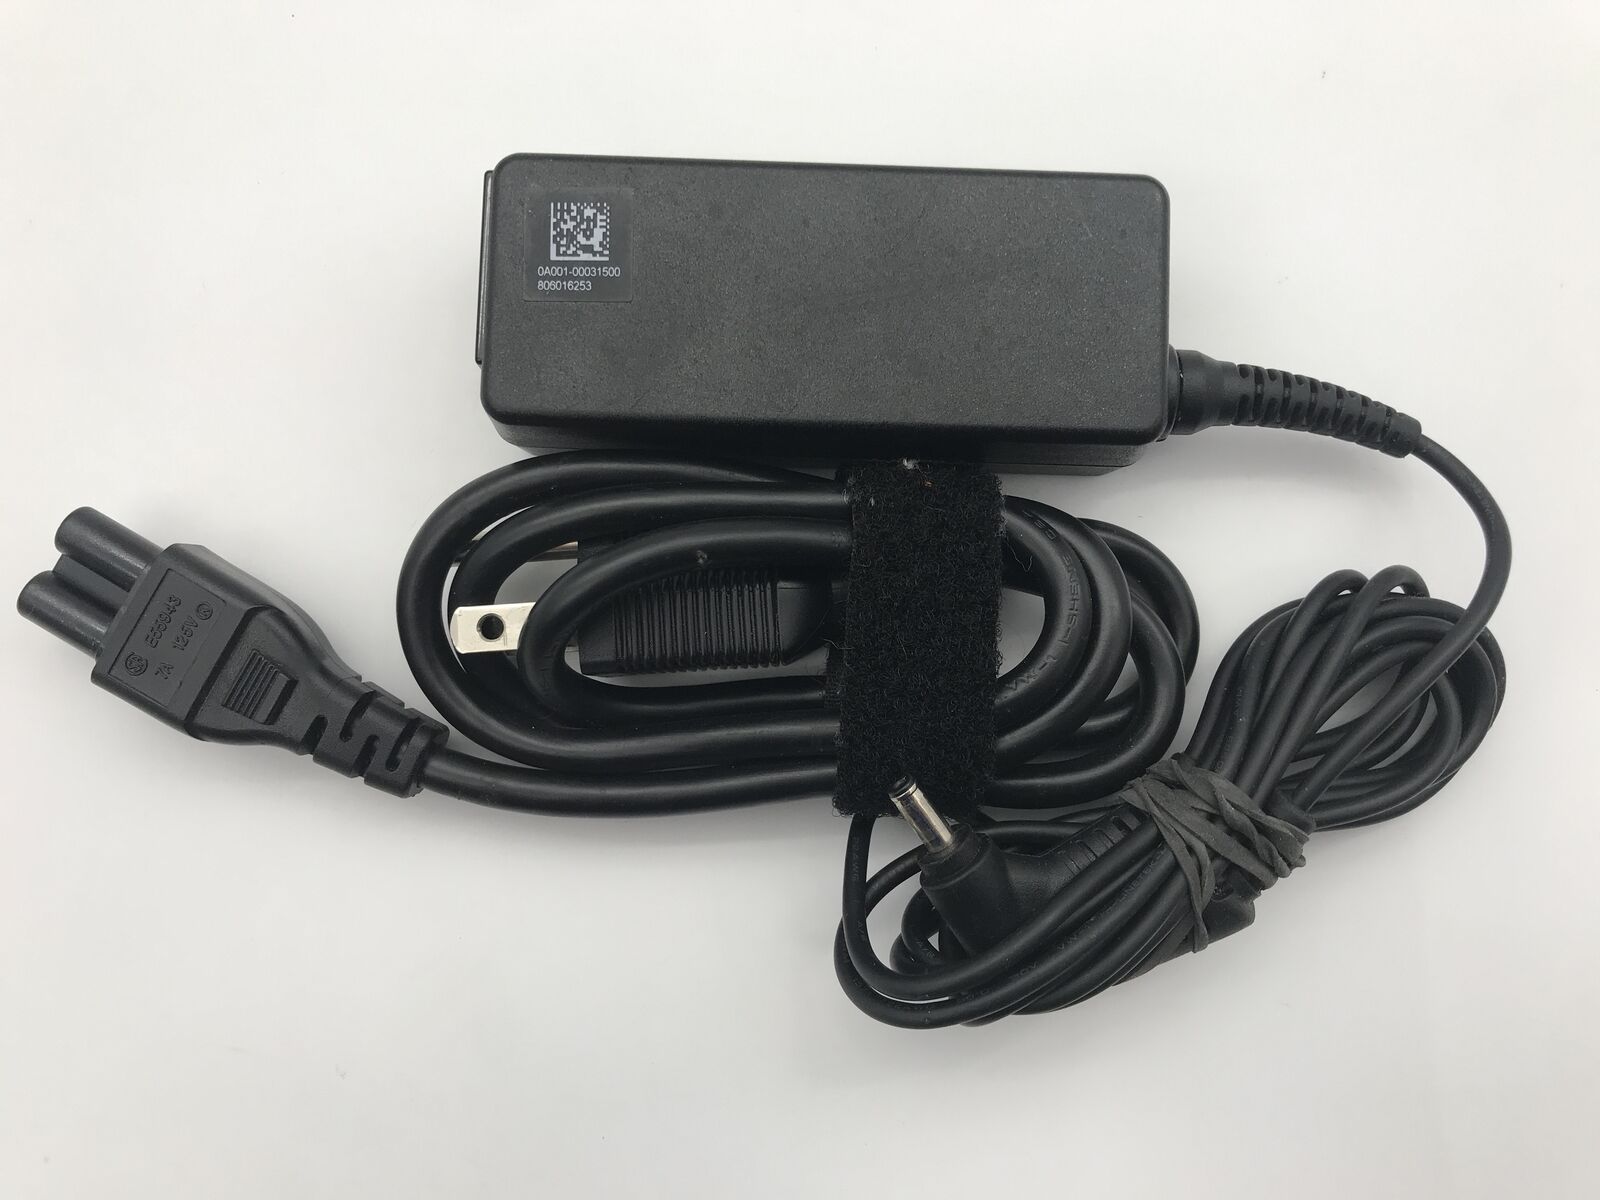 Lot of 10 GENUINE ASUS 40W AC ADAPTER 19V 2.1A Small Tip adp-40kd bb